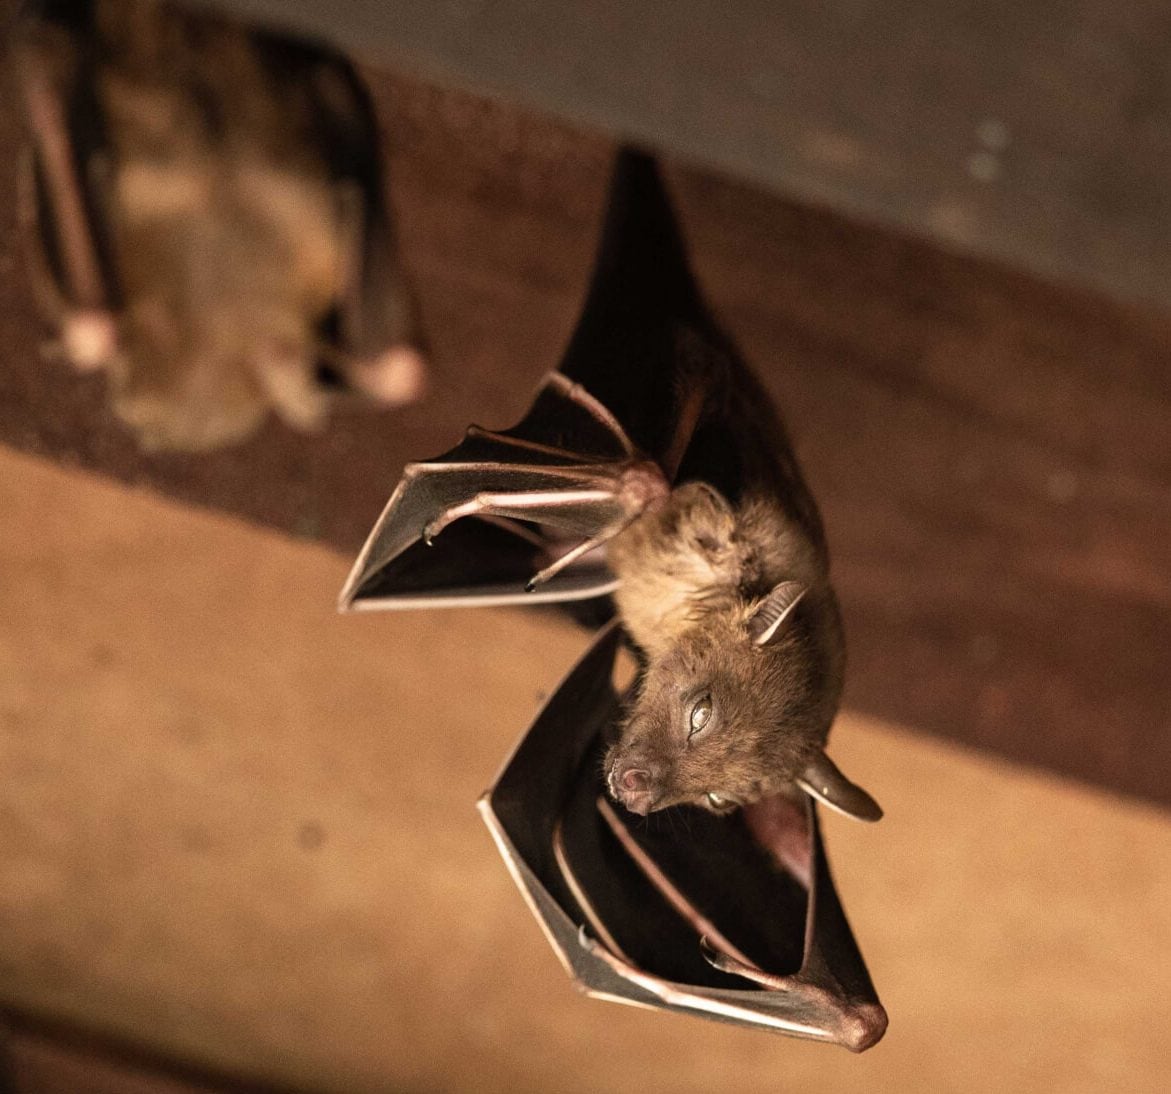 Expert bat removal services for a safe and humane solution in Milton